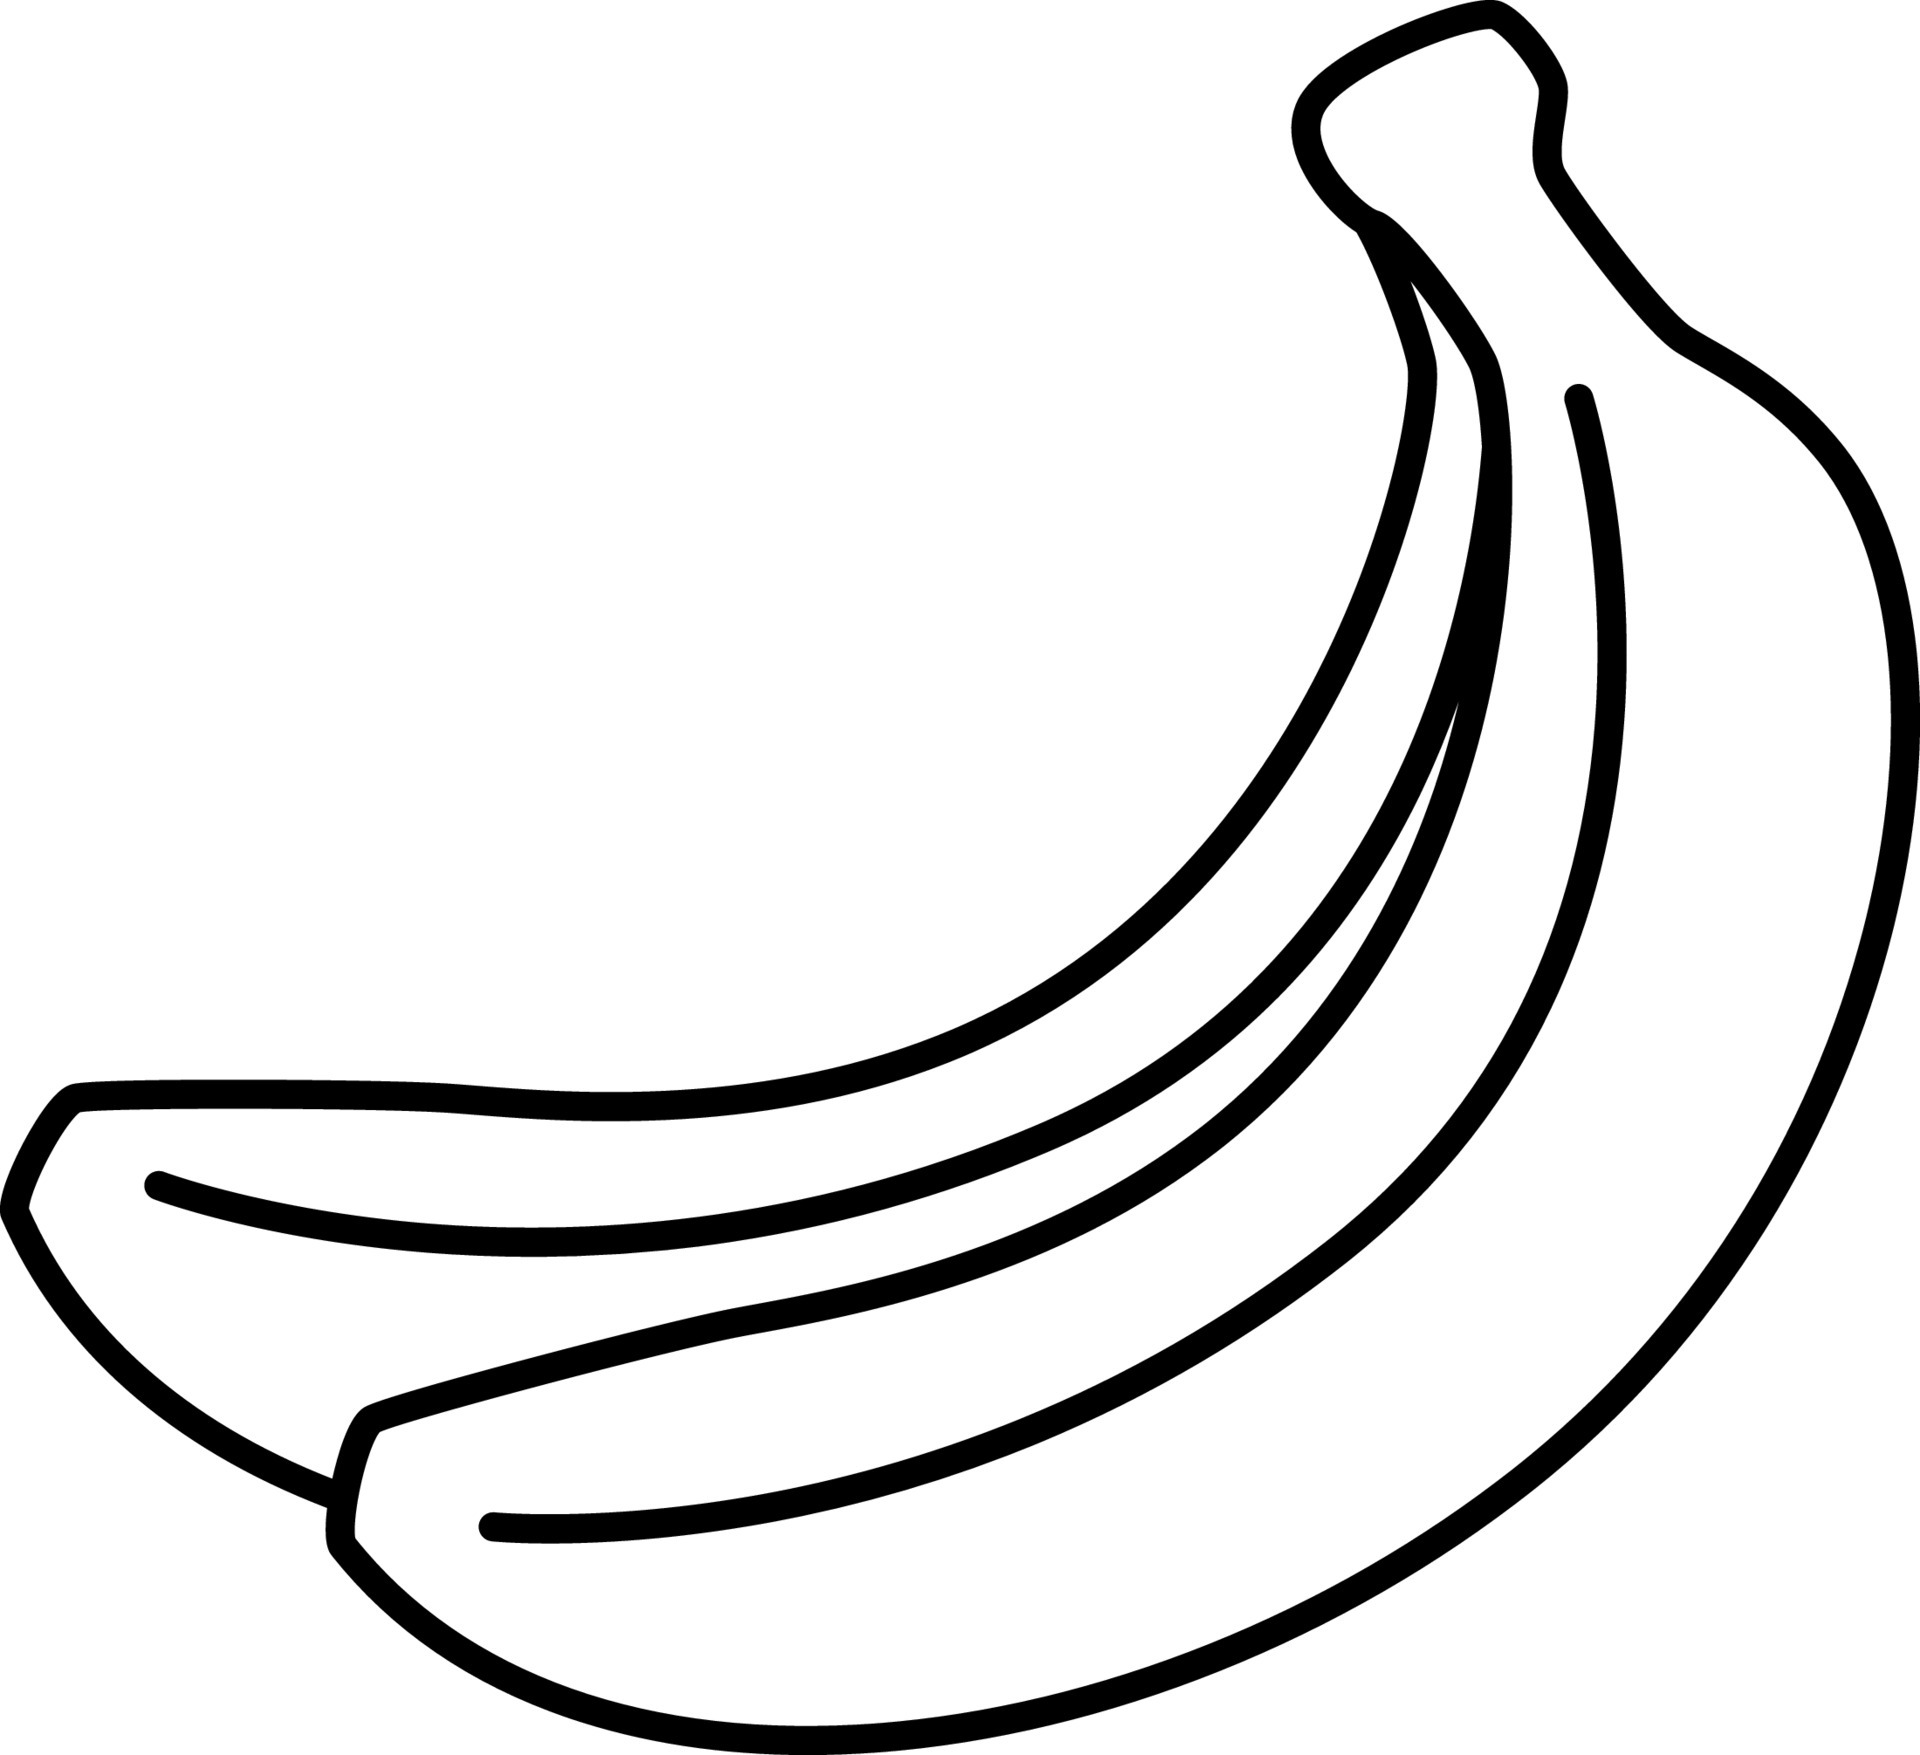 Banana Coloring Page for Kids 20 Vector Art at Vecteezy